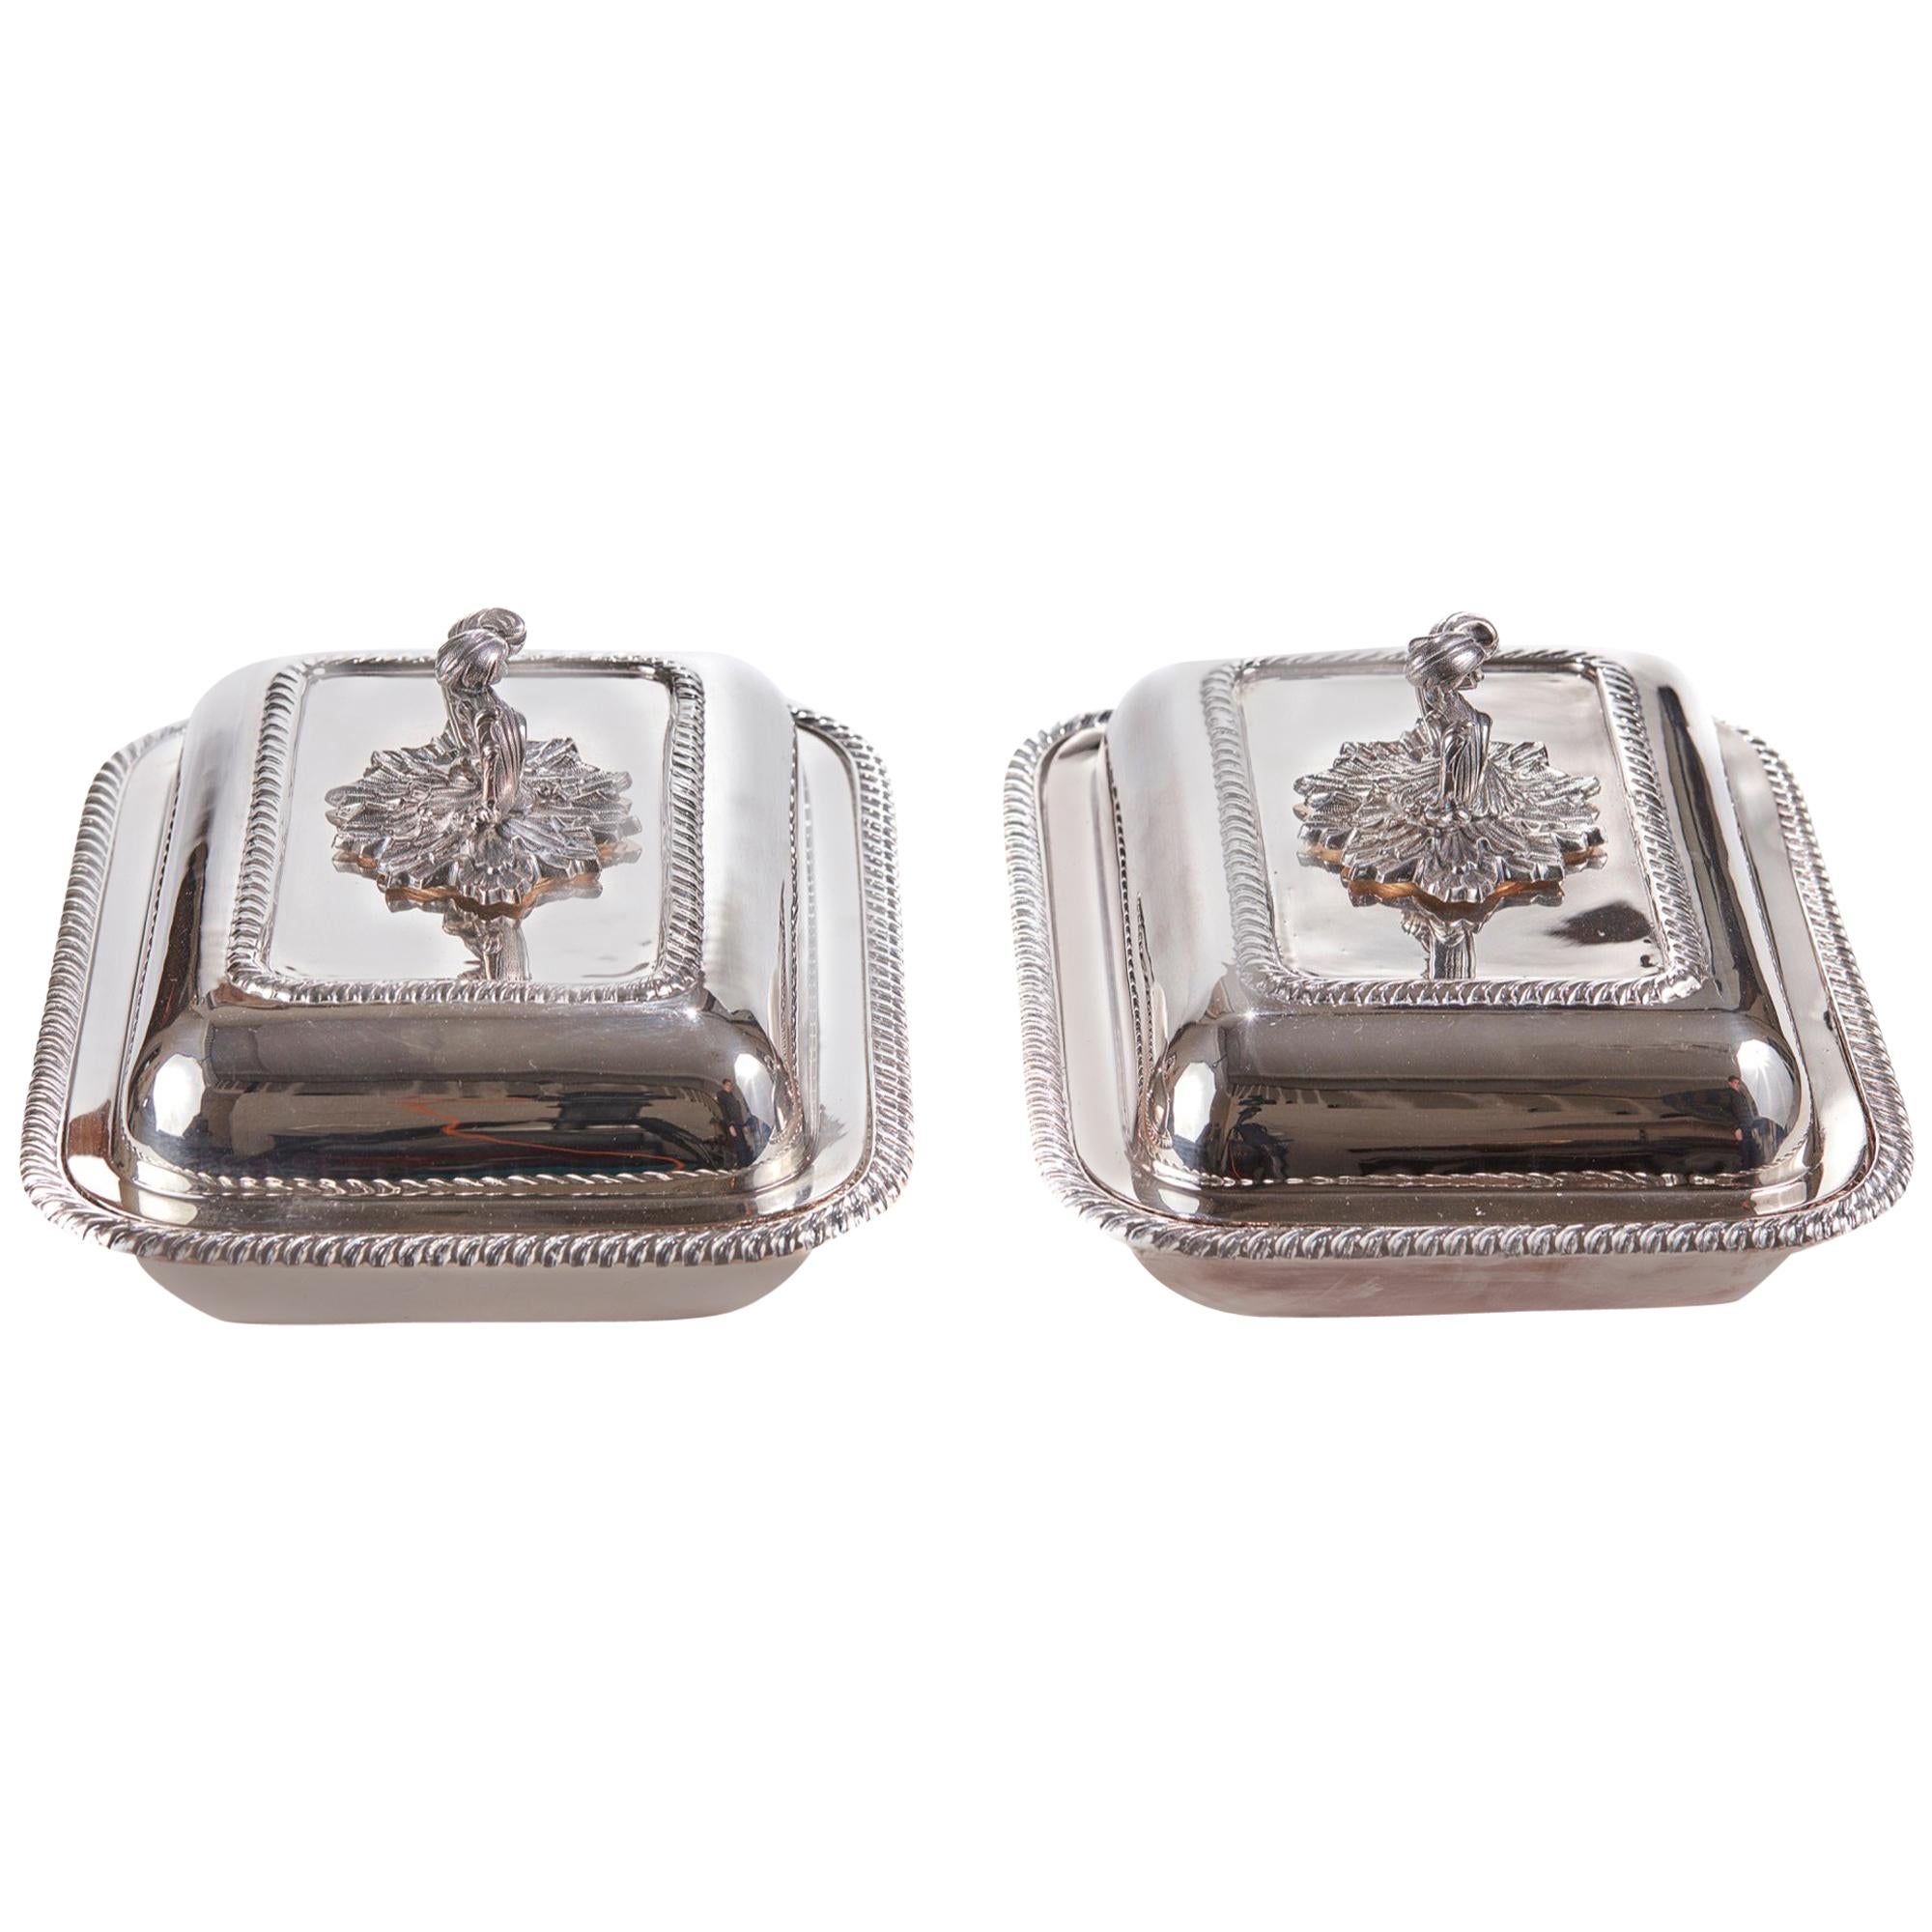 Pair of Antique Silver Plated Serving Dishes For Sale